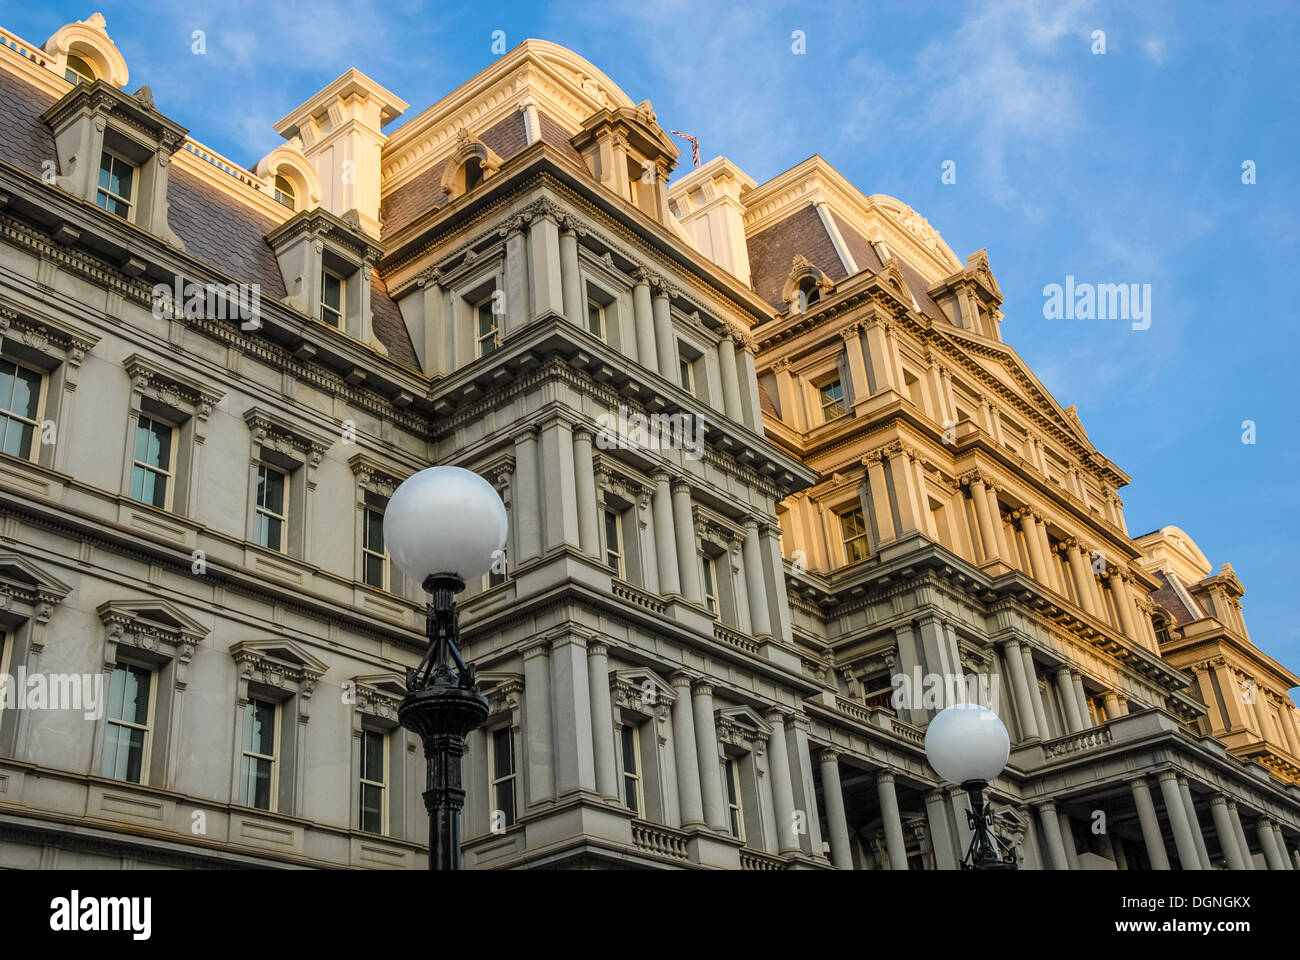 Eisenhower Executive Office Building, located to the west side of the White House, in Washington DC, USA. Stock Photo